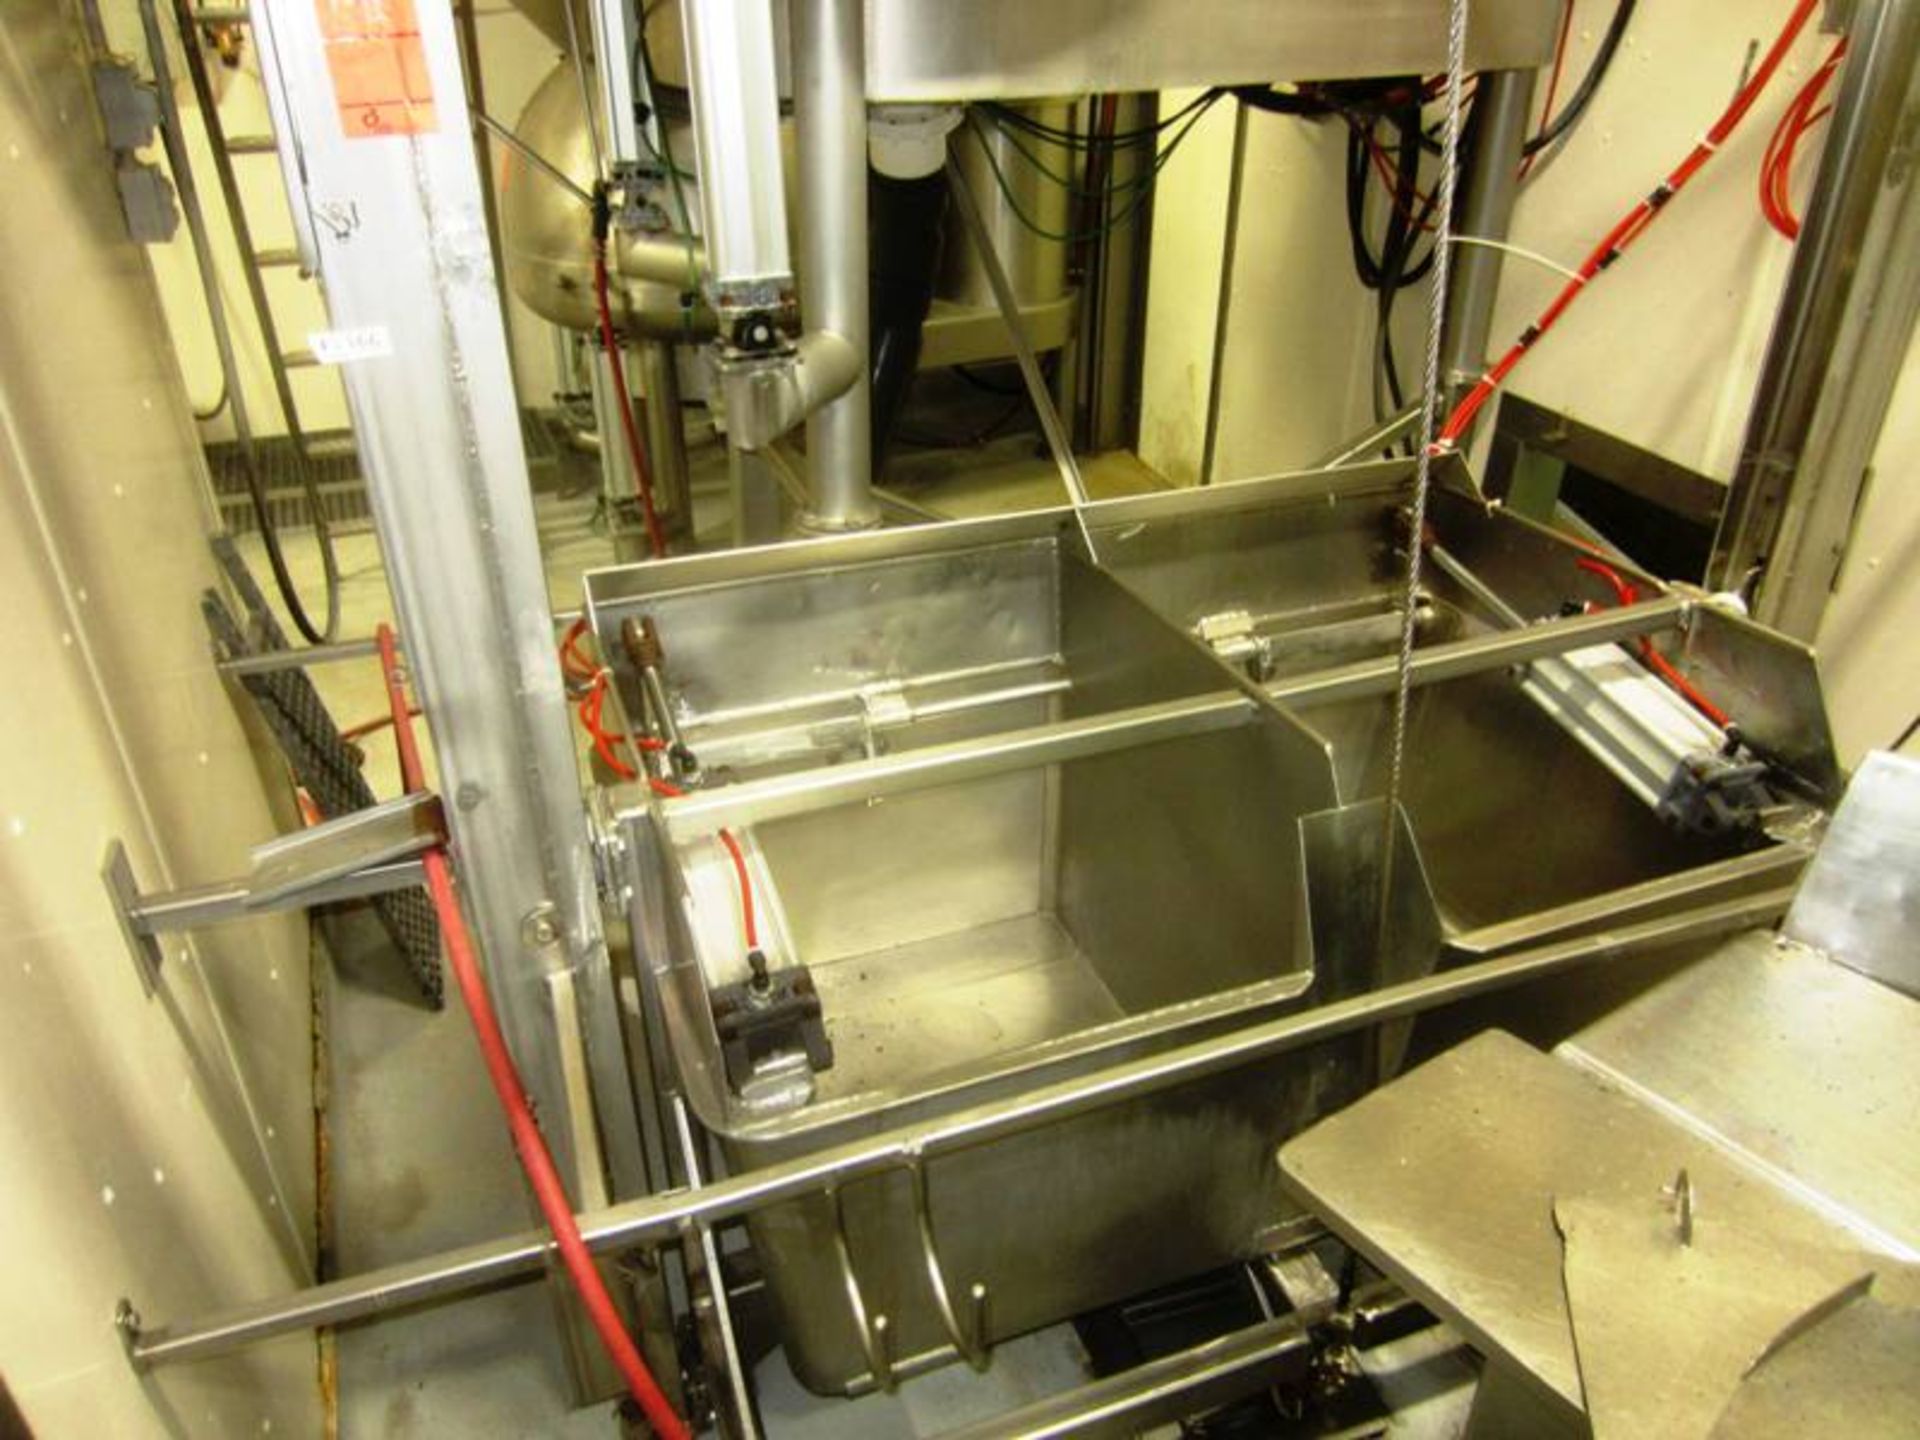 TecFood Mdl. V20 S.S. Stomach Washer with s.s. loader 3' W X 5' L, complete with rail, overhead work - Image 4 of 8